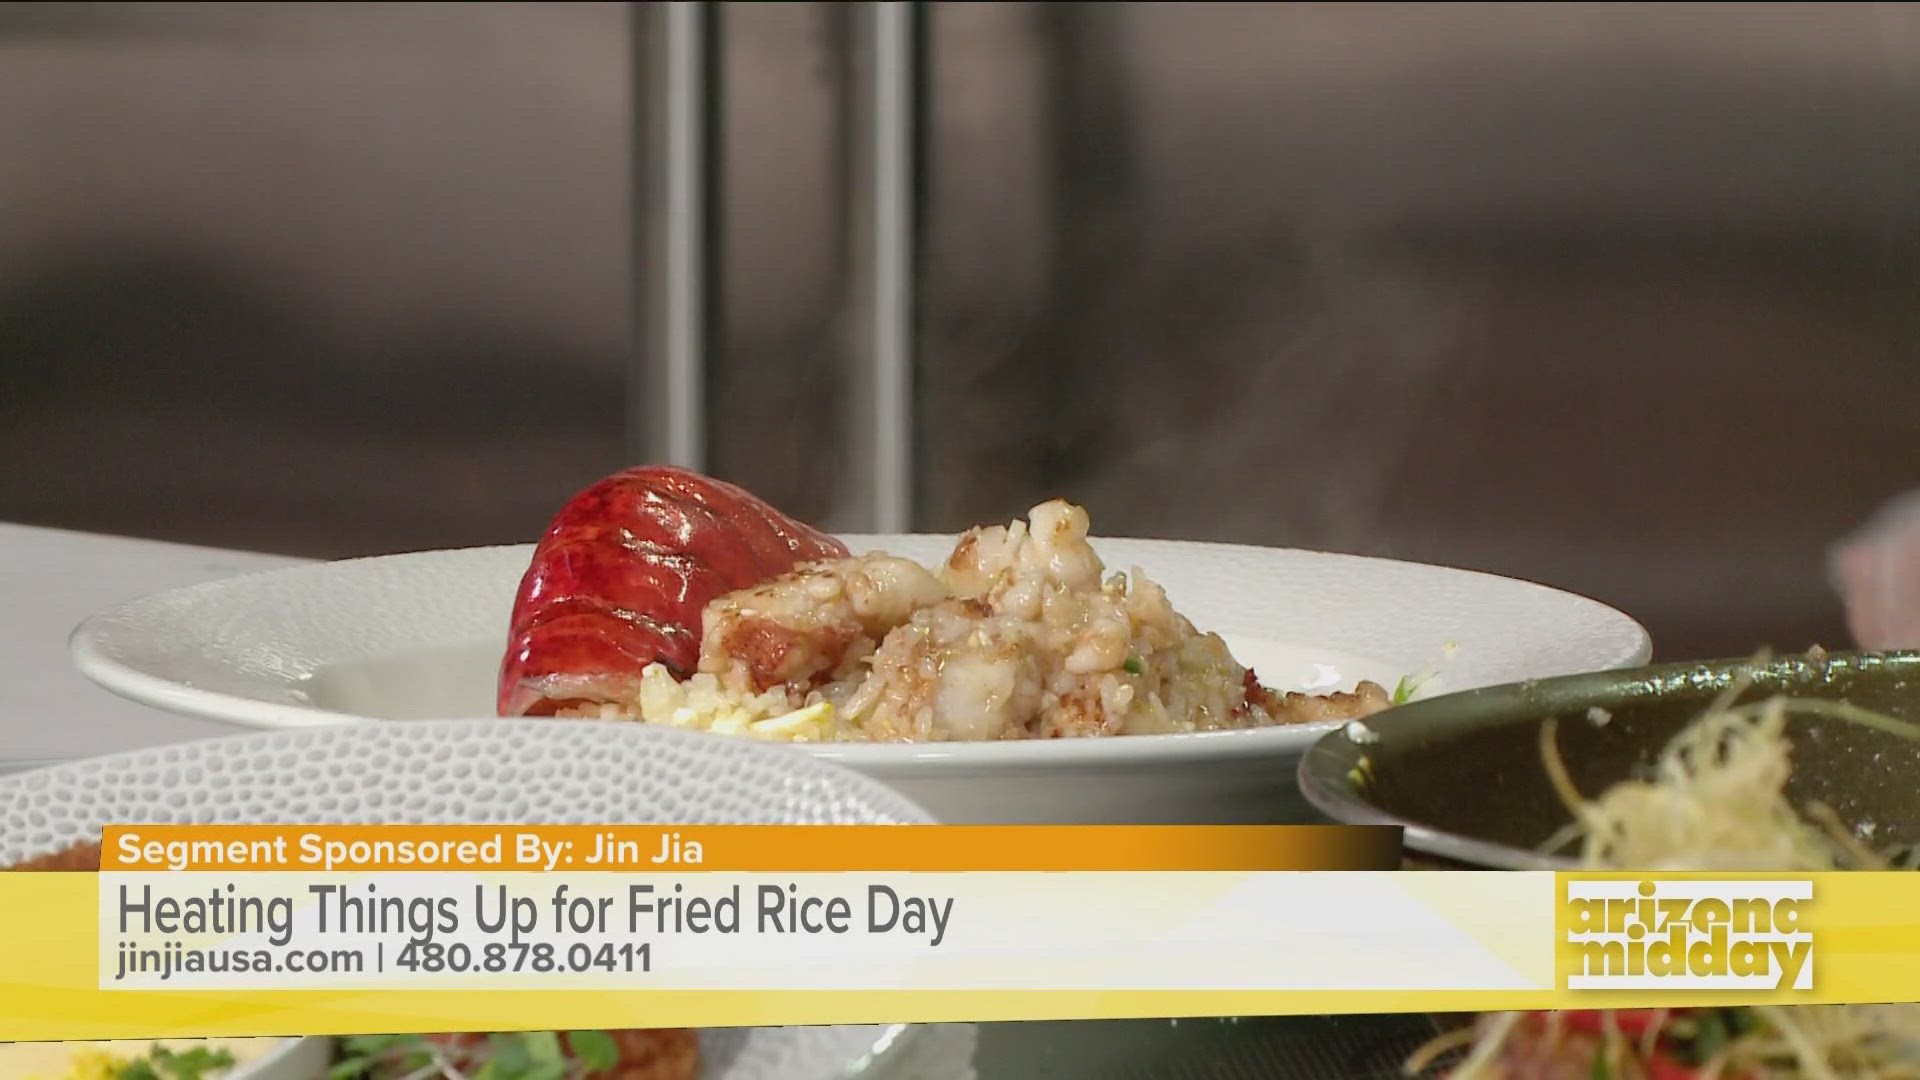 Chef Choi and Chef Paulo with Jin Jia show us the secret to making flavorful fried rice and share a twist on the classic dish.